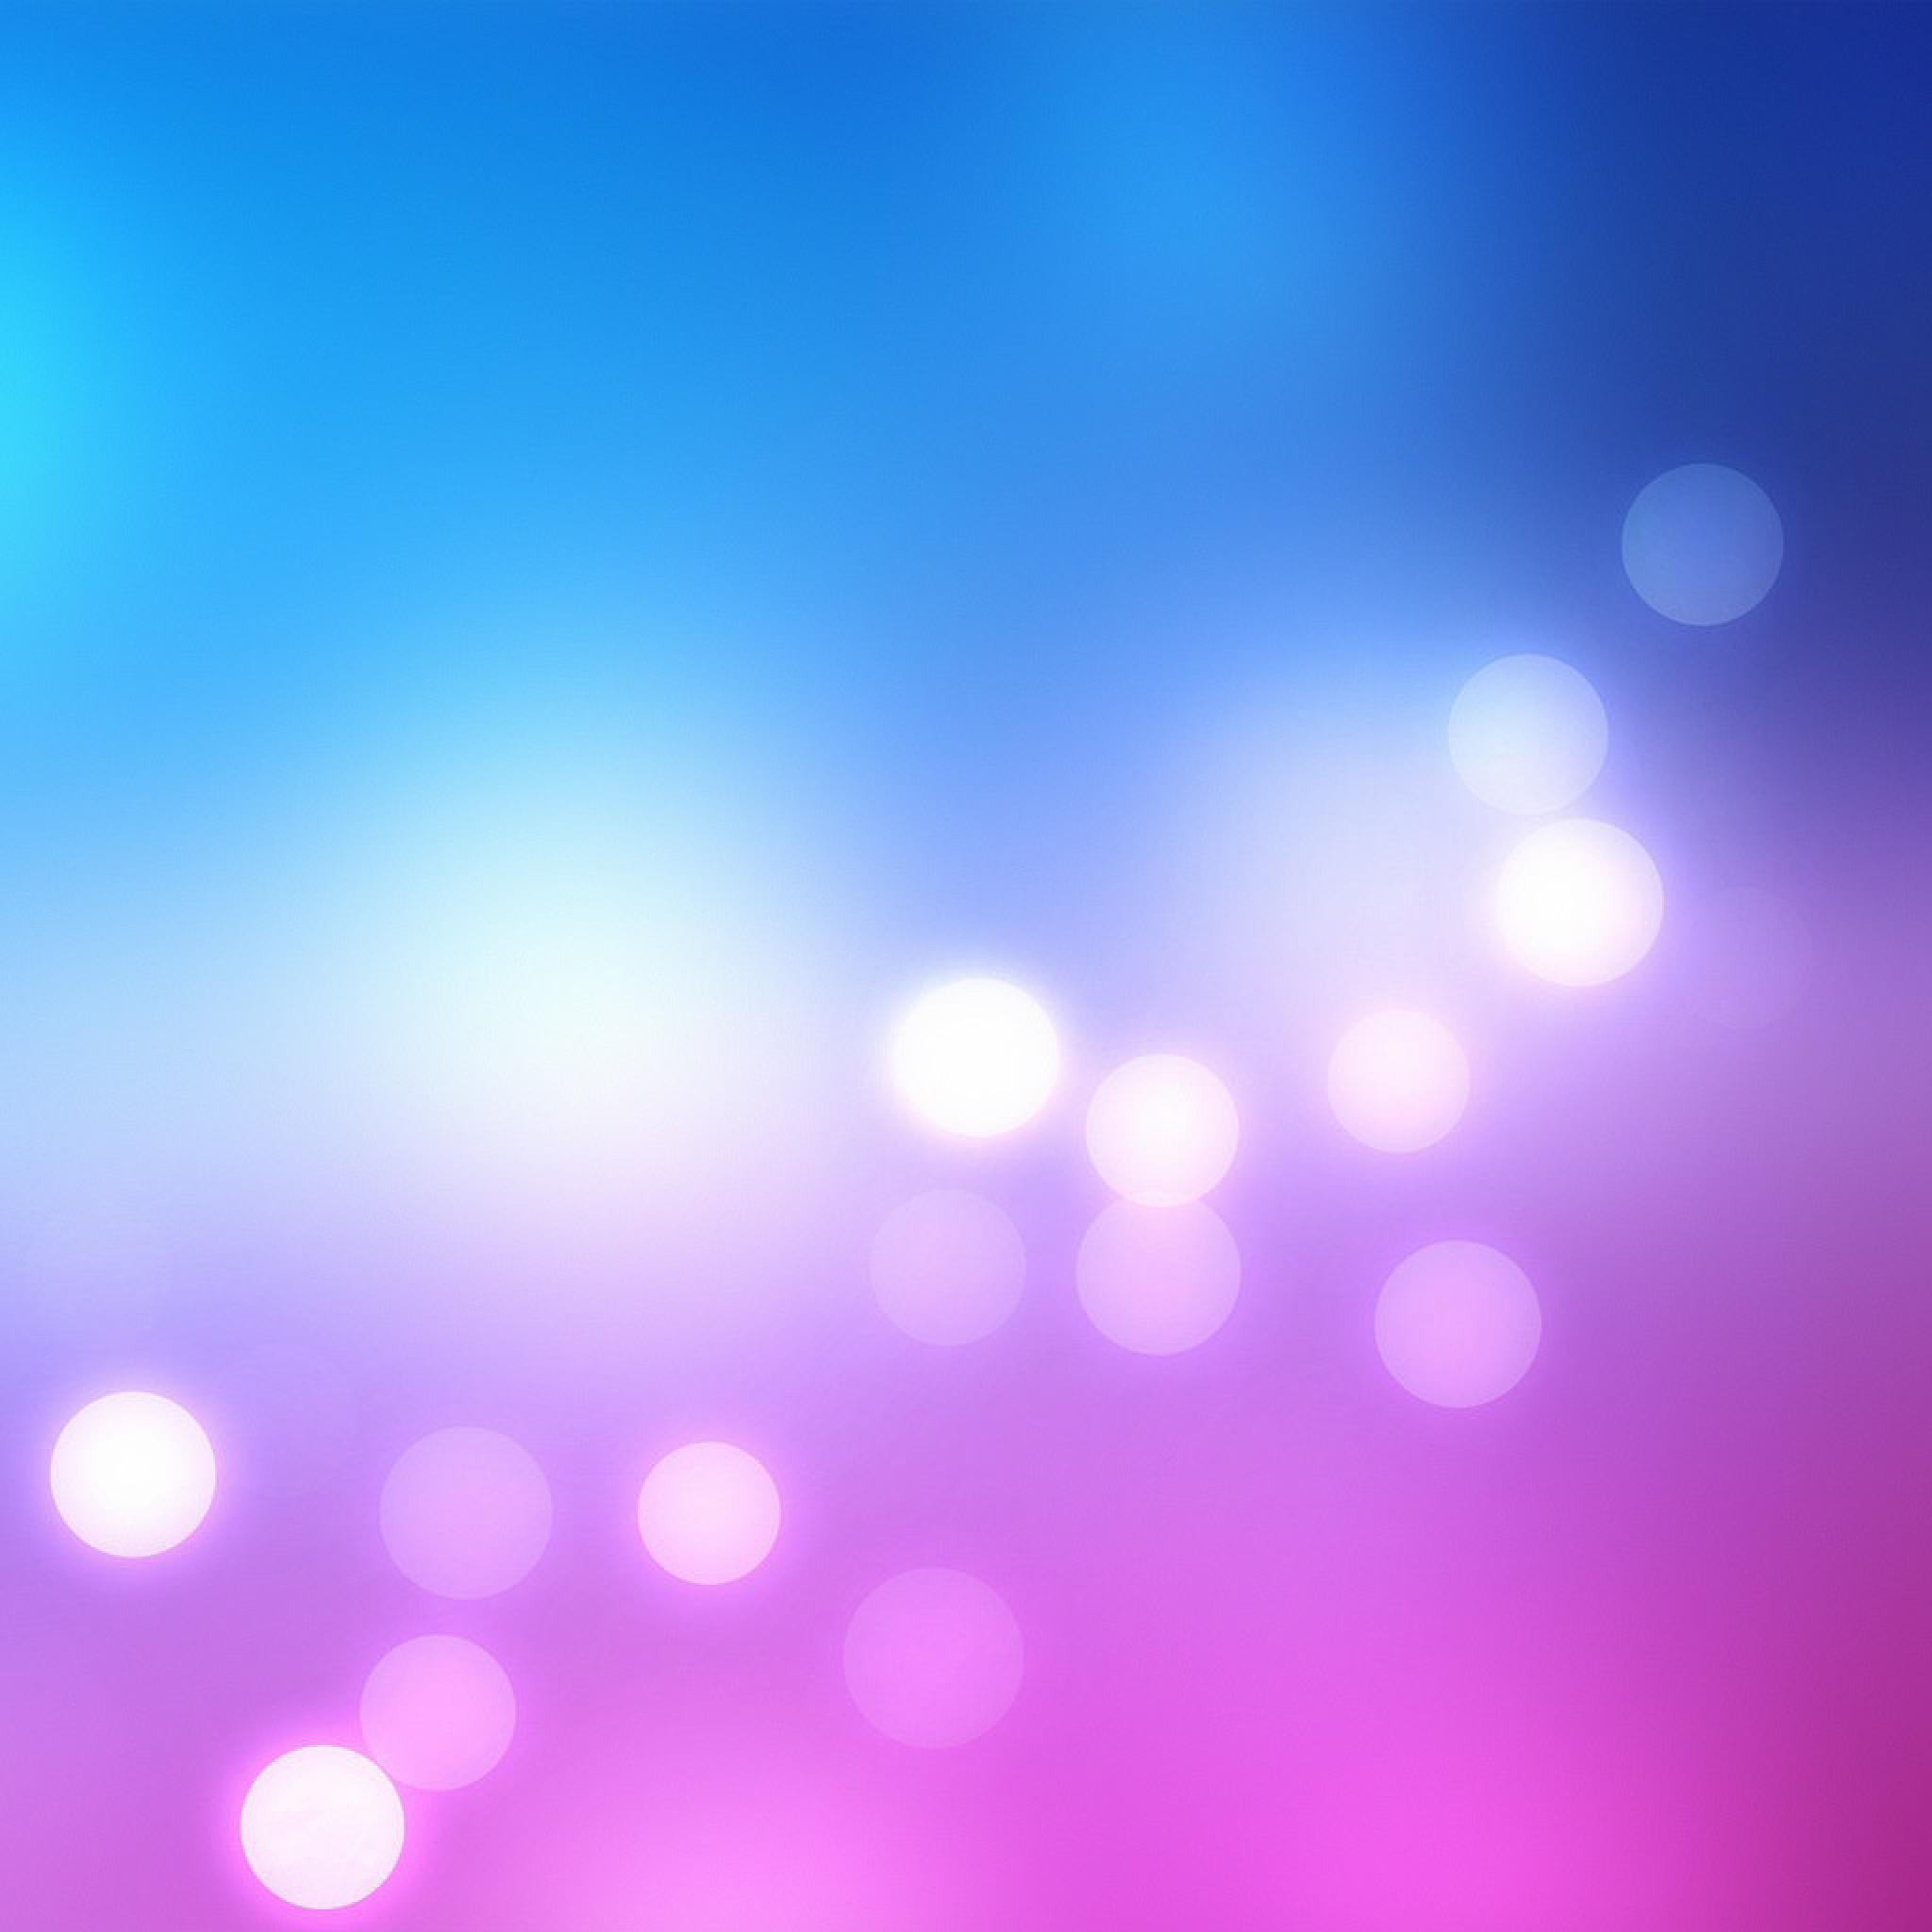 Wallpaper For > Party Lights Background